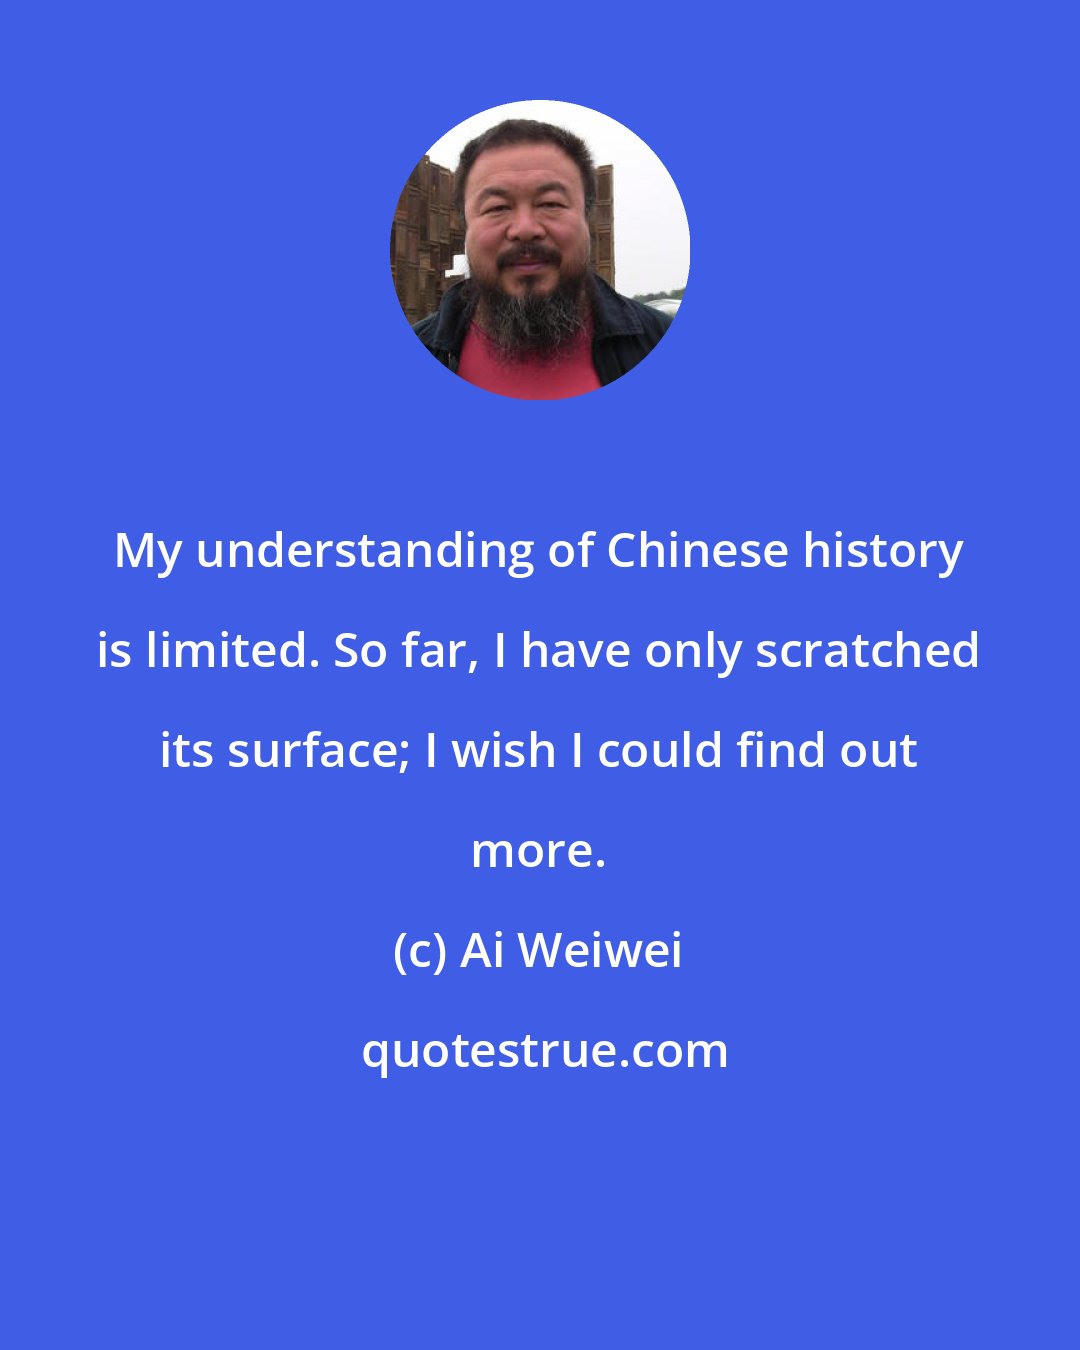 Ai Weiwei: My understanding of Chinese history is limited. So far, I have only scratched its surface; I wish I could find out more.